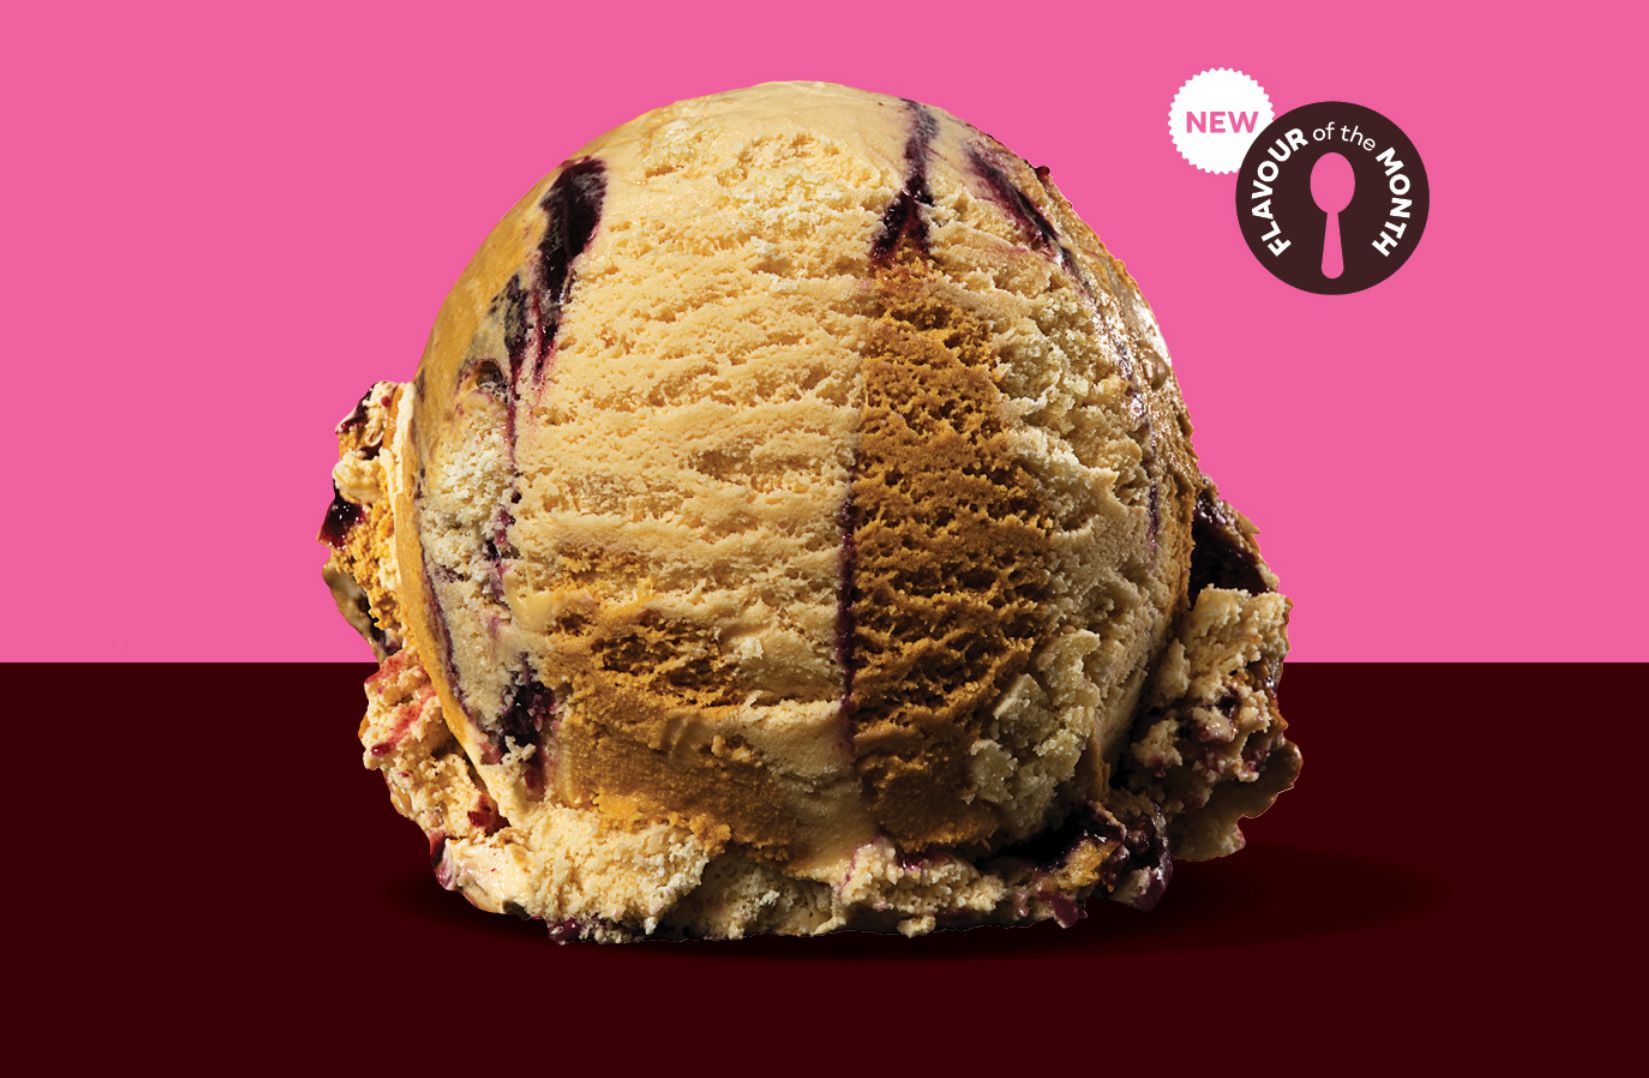 Baskin-Robbins Celebrates this May with Breakfast in Bed, the Newest Flavor of the Month